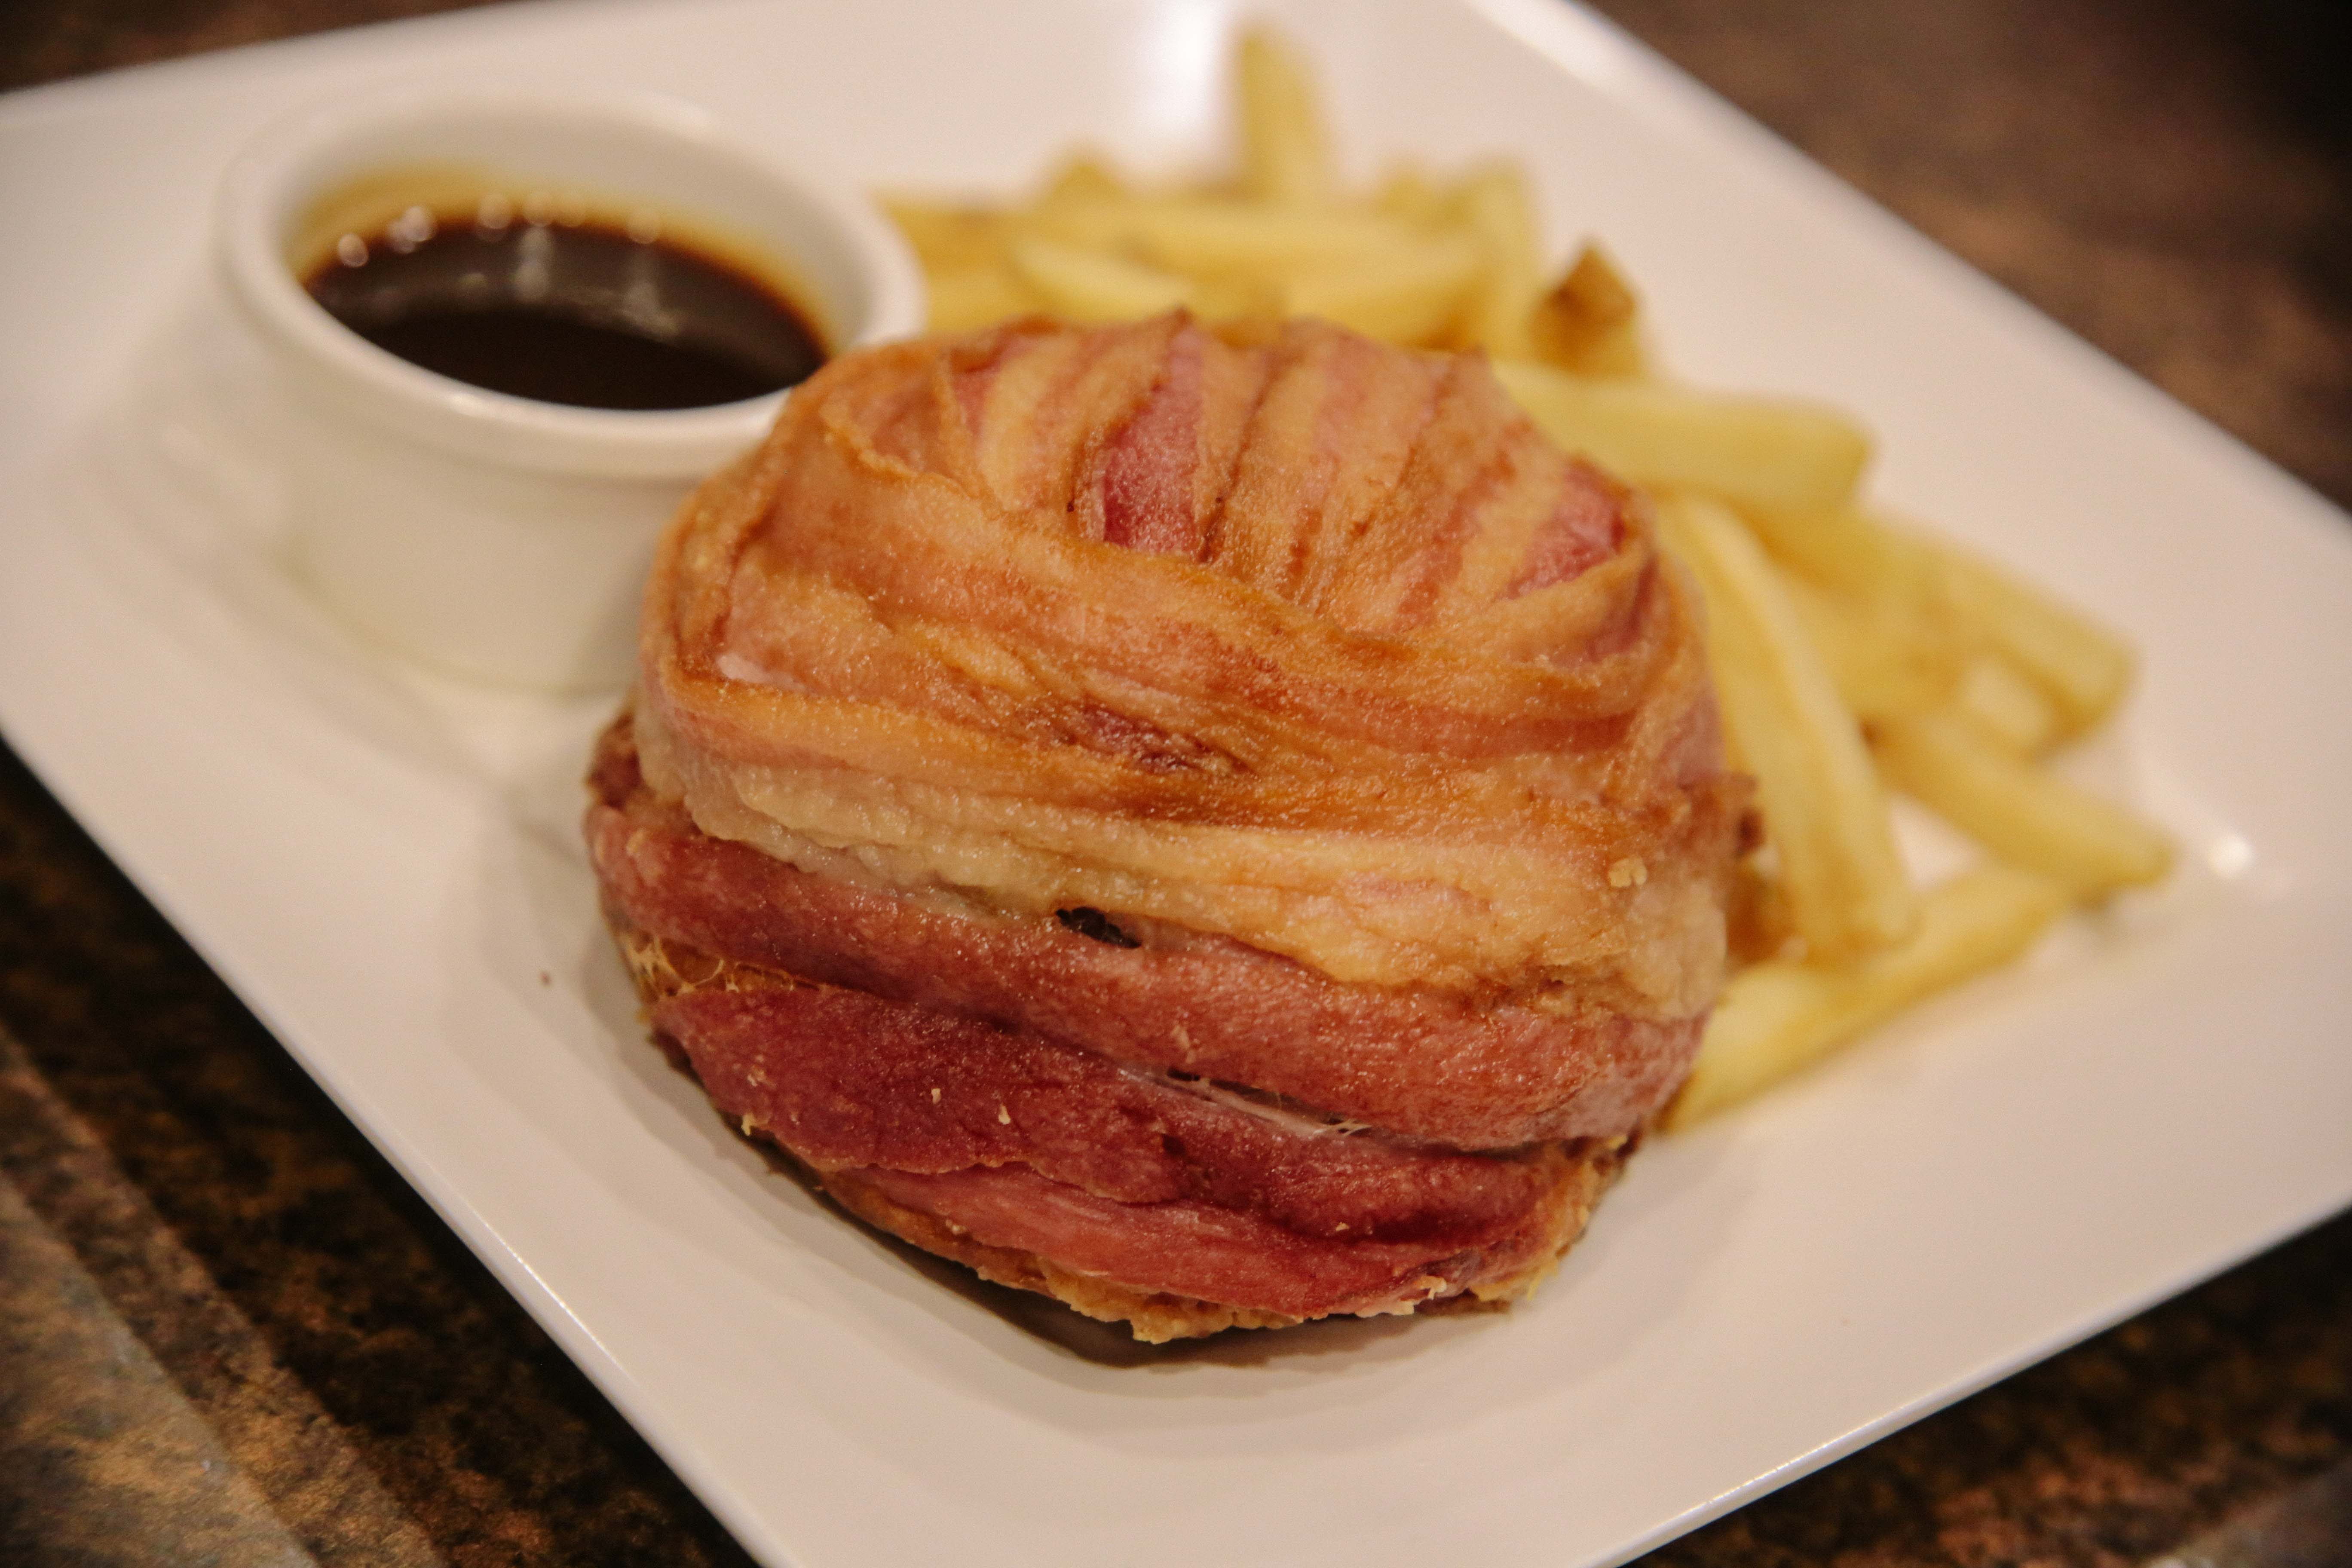 Deep-fried bacon-wrapped burger with barbecue rum sauce and fries on the side. Photo by Paolo Abad/Rappler 